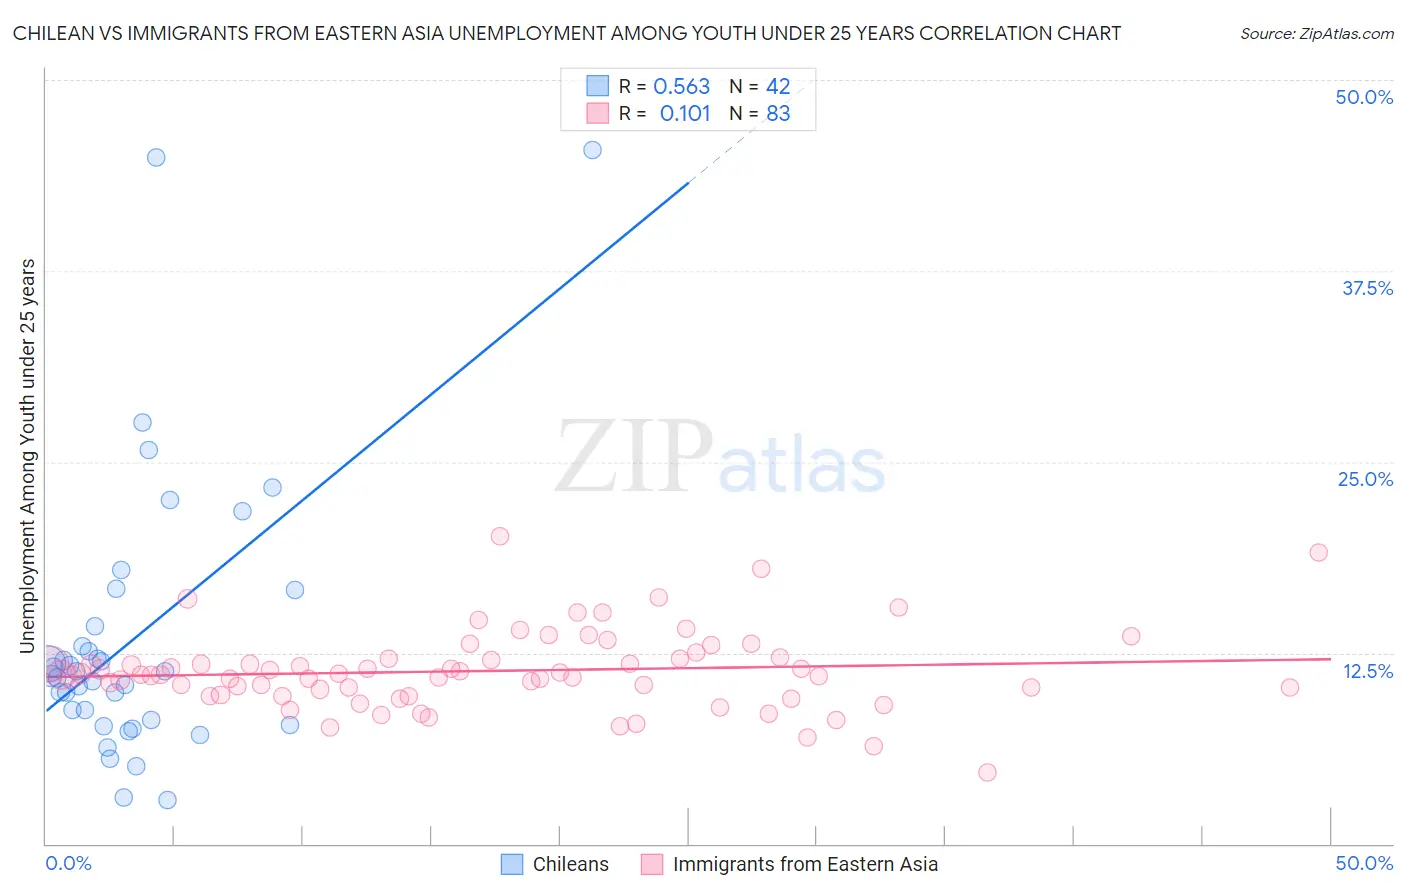 Chilean vs Immigrants from Eastern Asia Unemployment Among Youth under 25 years